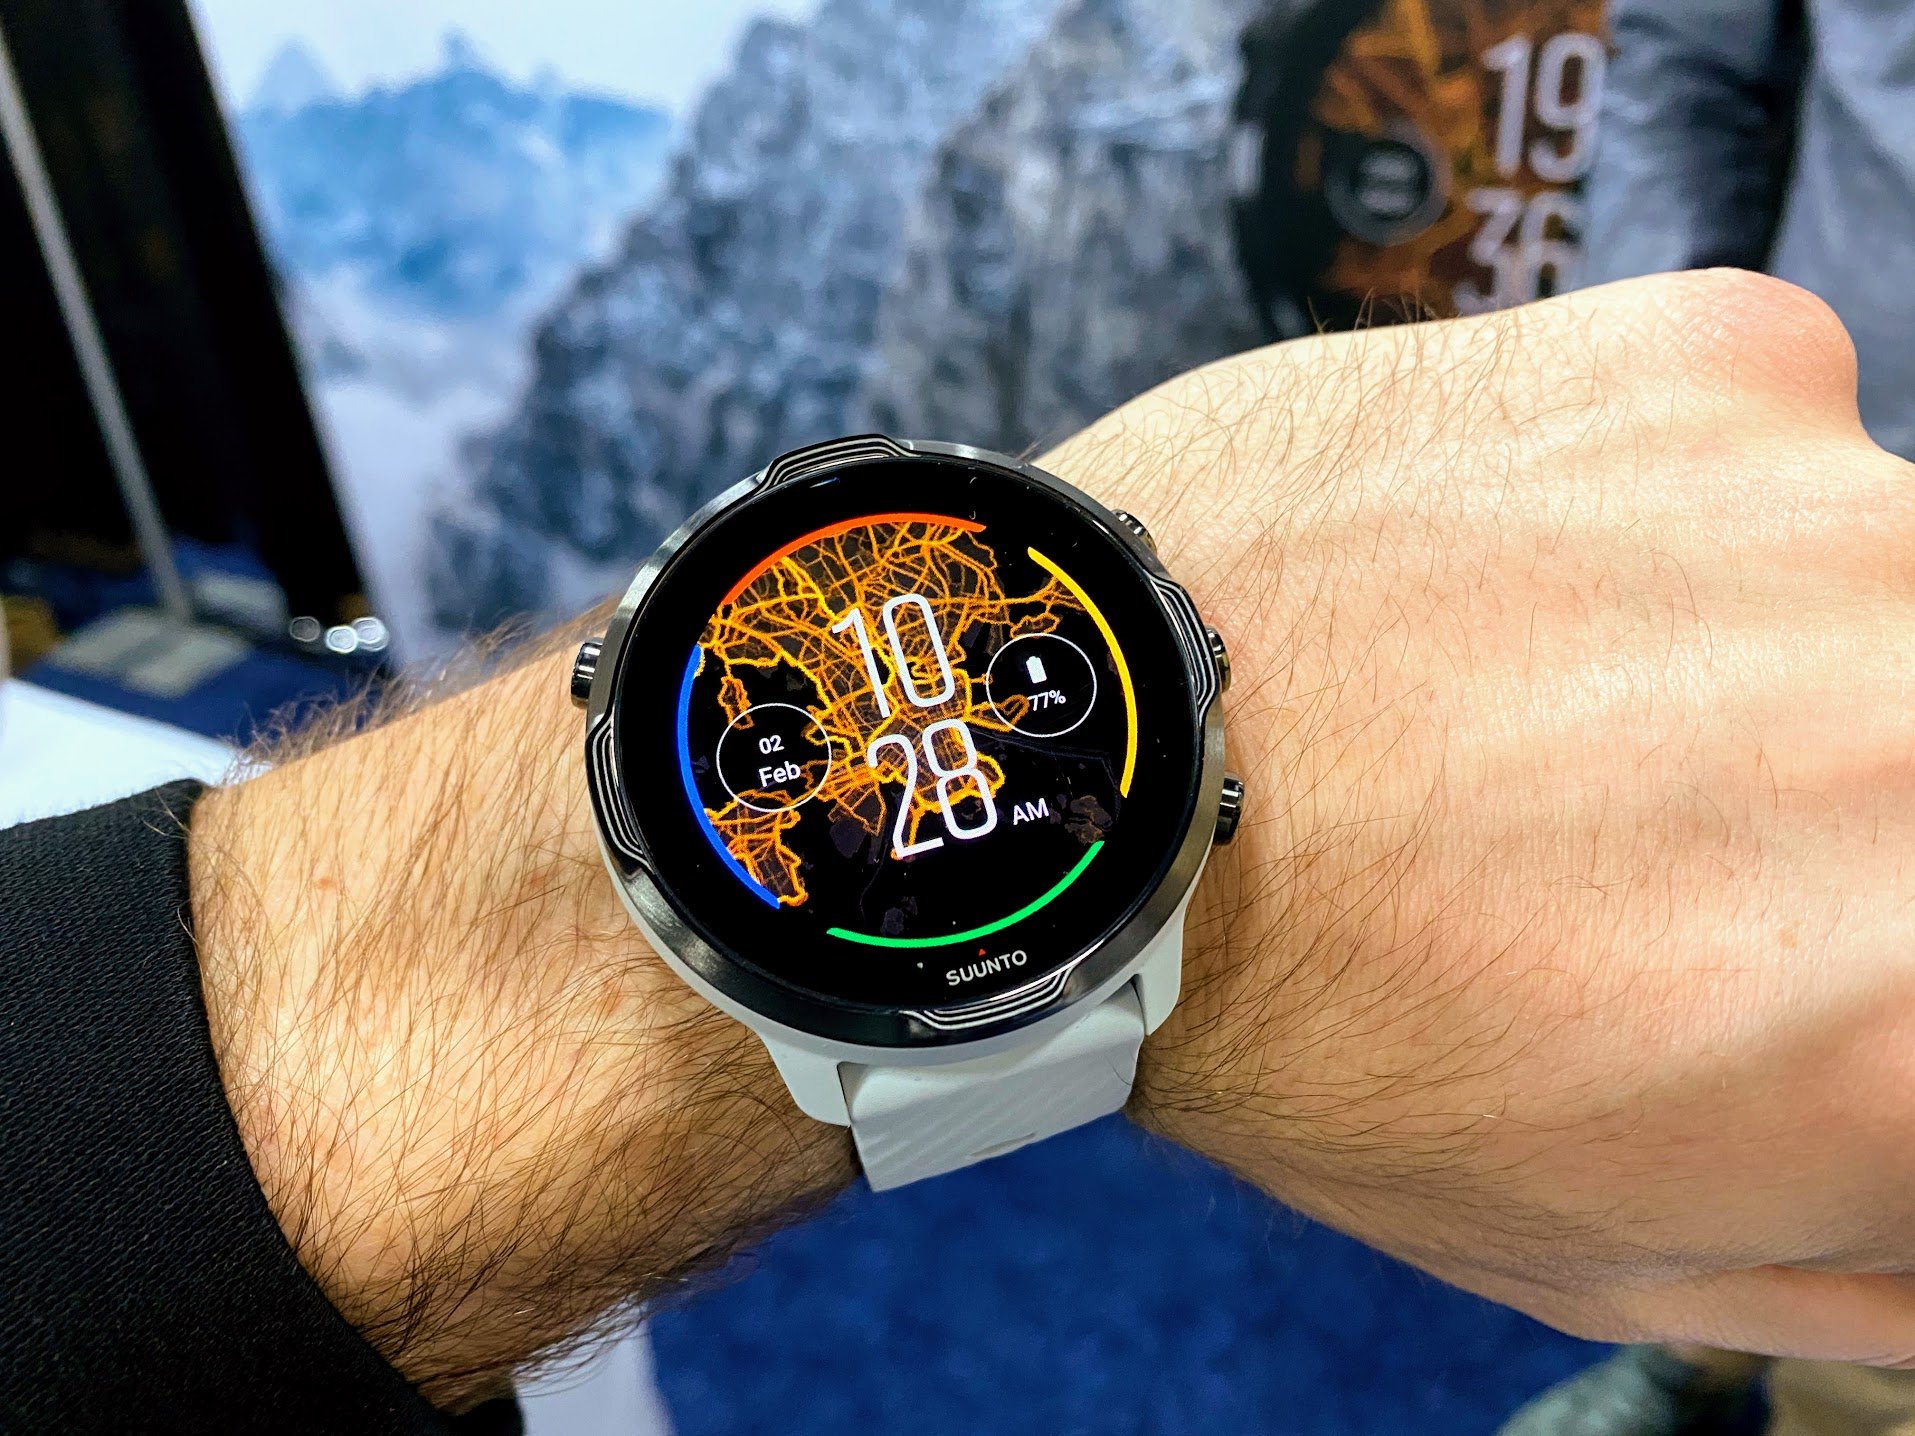 Suunto 7 with Wear OS - Hands-on details and interface walk